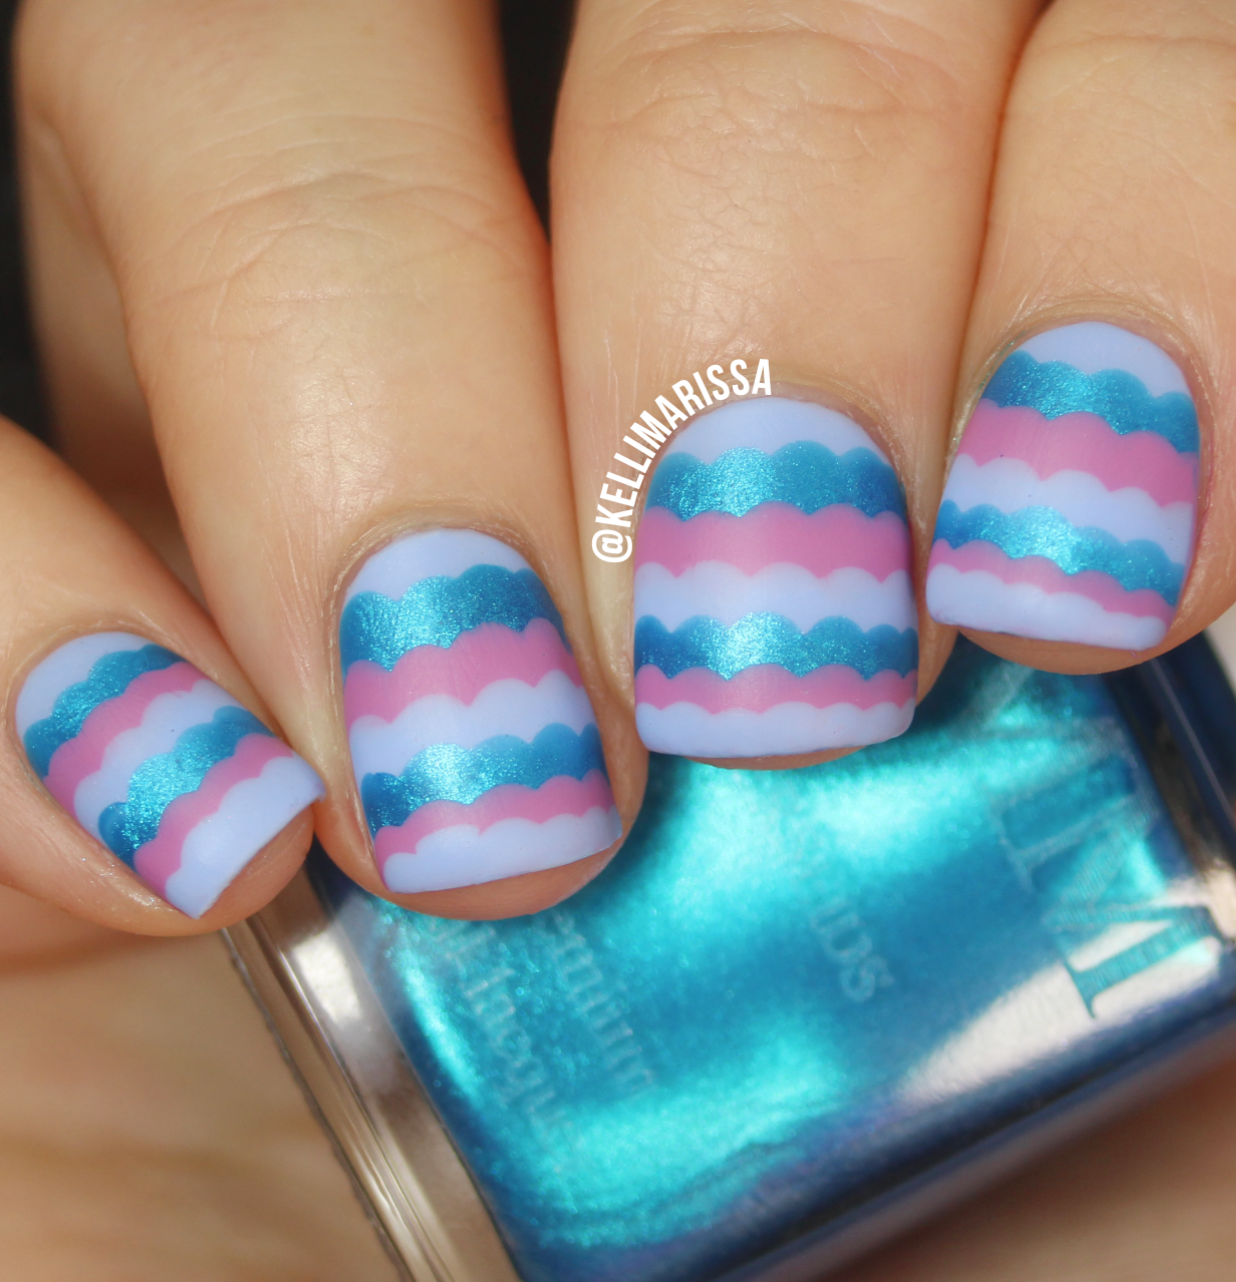 Learn how to create this easy ruffle nail art with this step